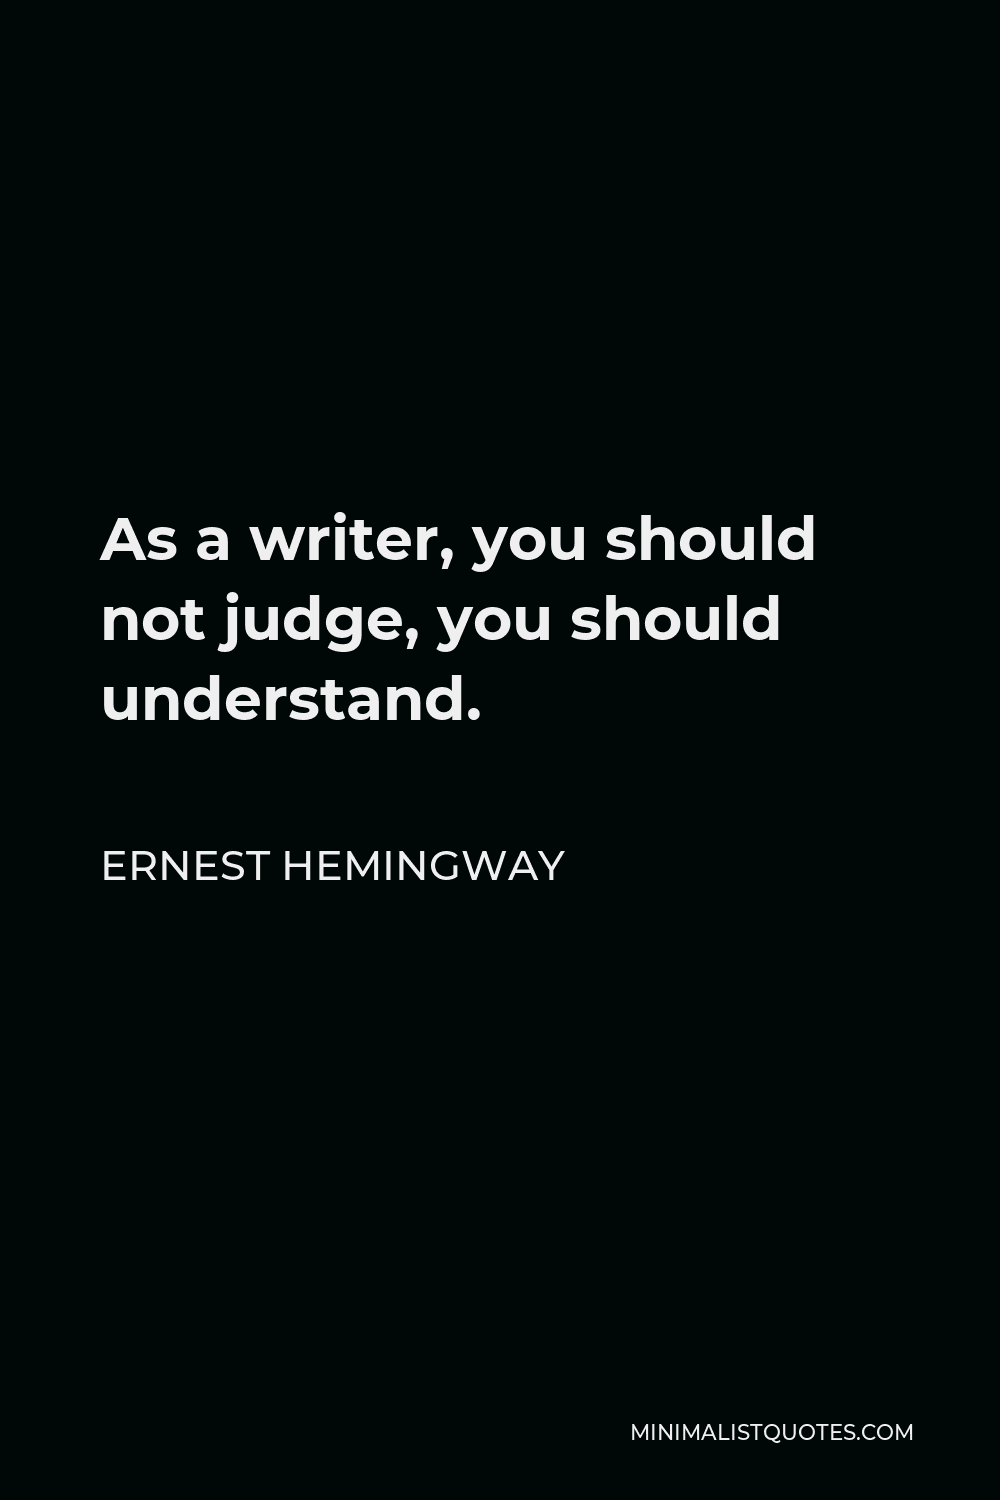 https://minimalistquotes.com/wp-content/uploads/2021/04/as-a-writer-you-should-not-judge-you-should-unders.jpg